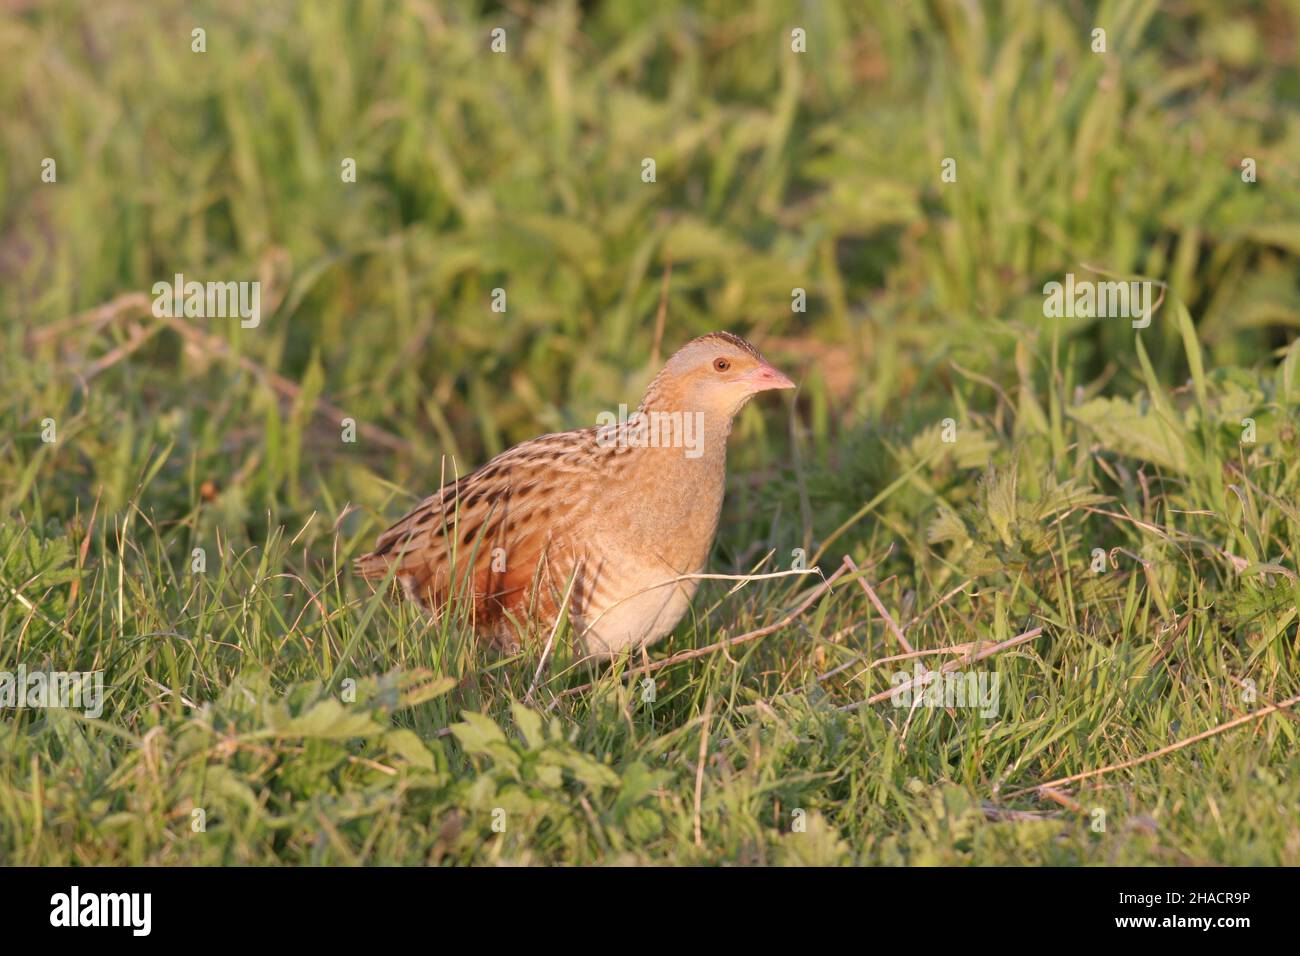 Corncrake, a migratory species flying to and from Africa each year,  when you see a corncrake fly a feat you would find hard to believe! Stock Photo